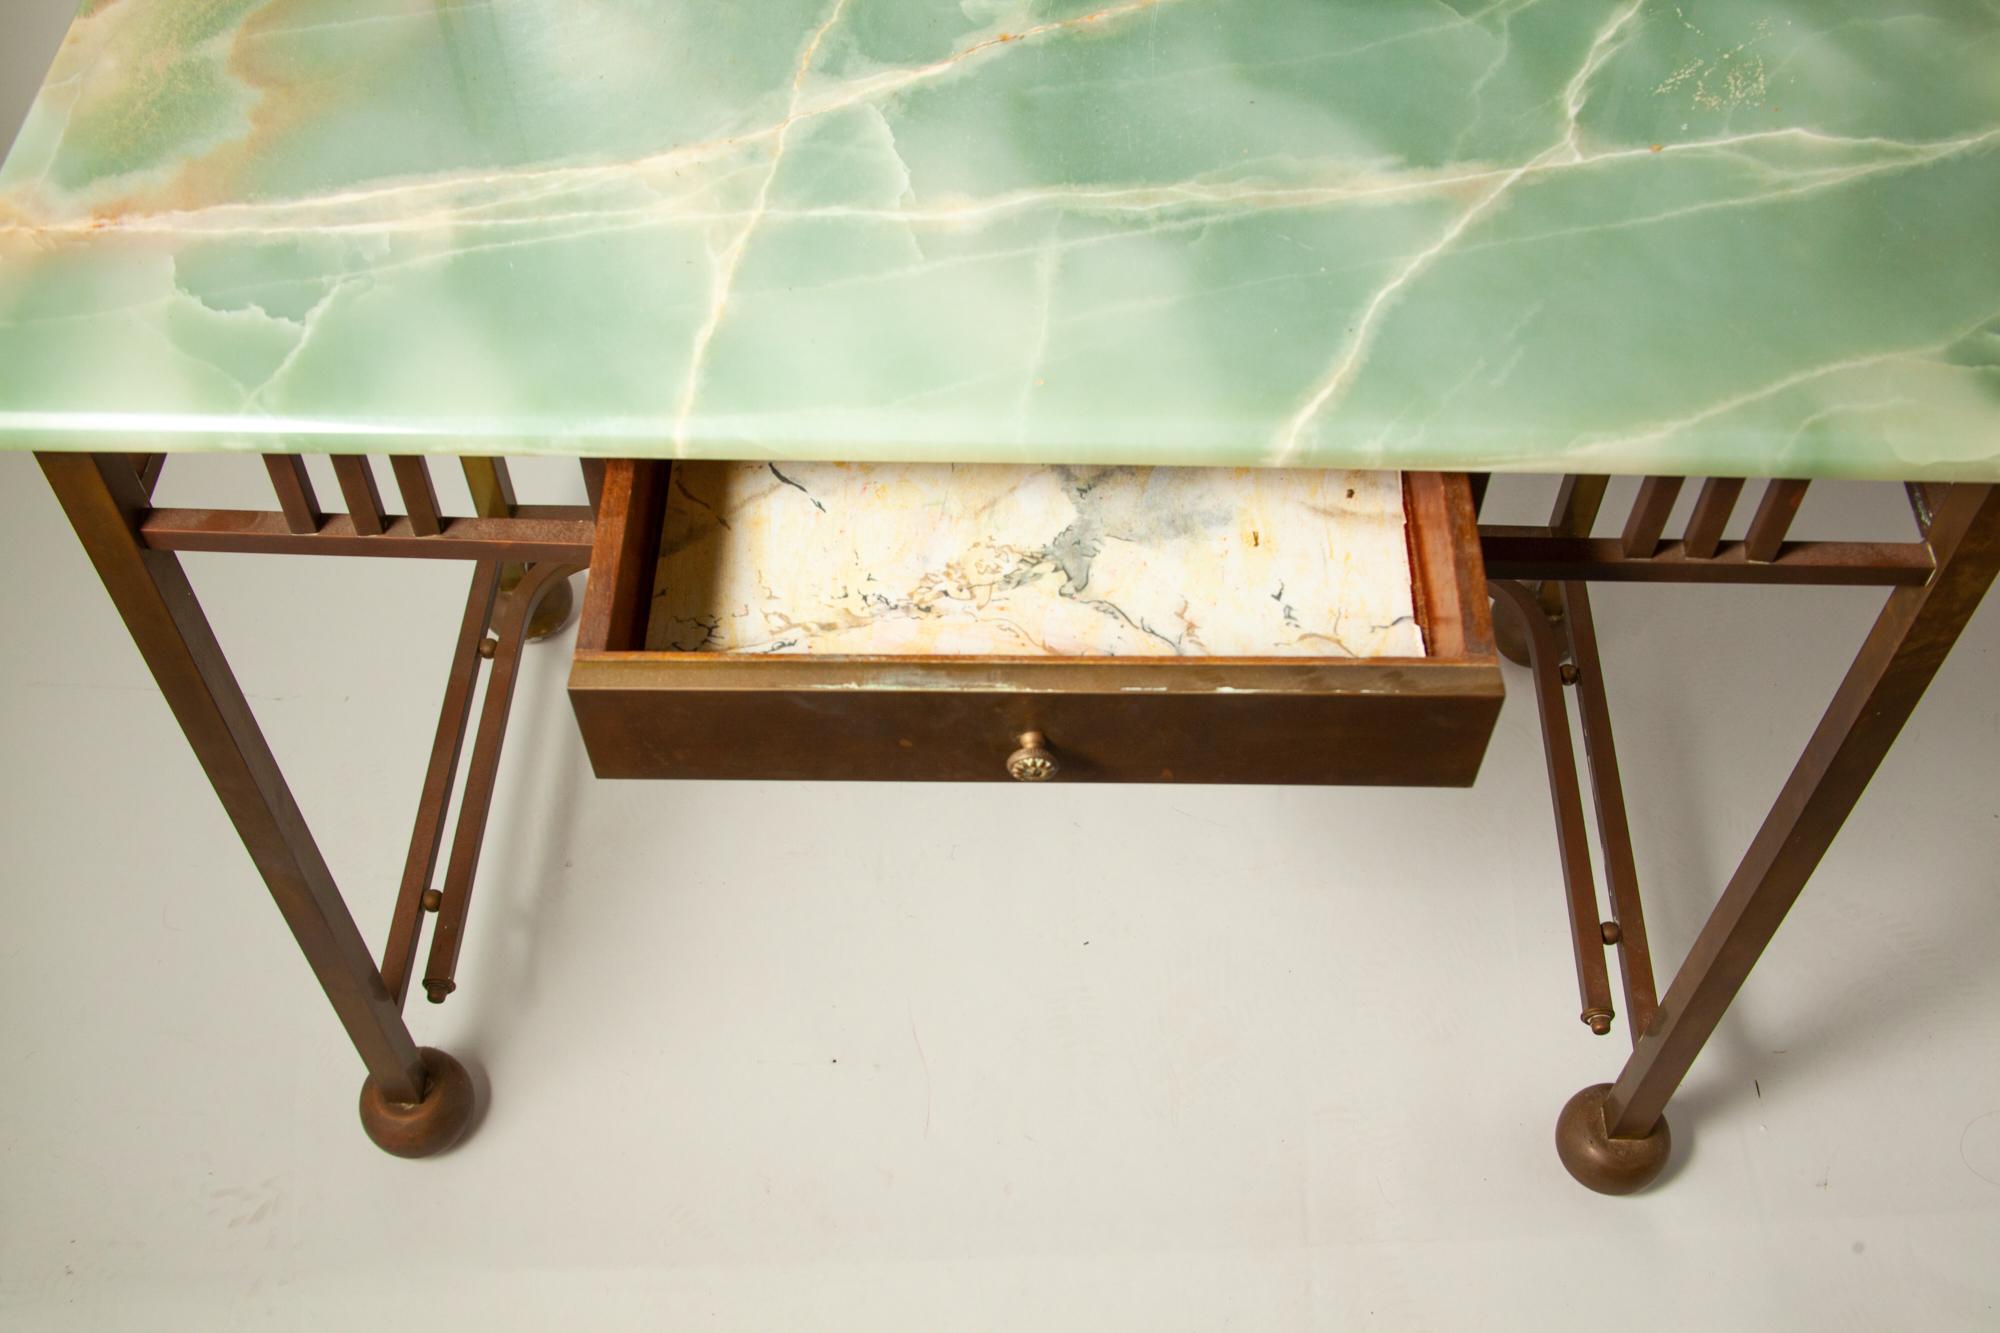 Forged Art Deco Marble & Brass Dressing Table with Mirror, French Le Lit Pardon